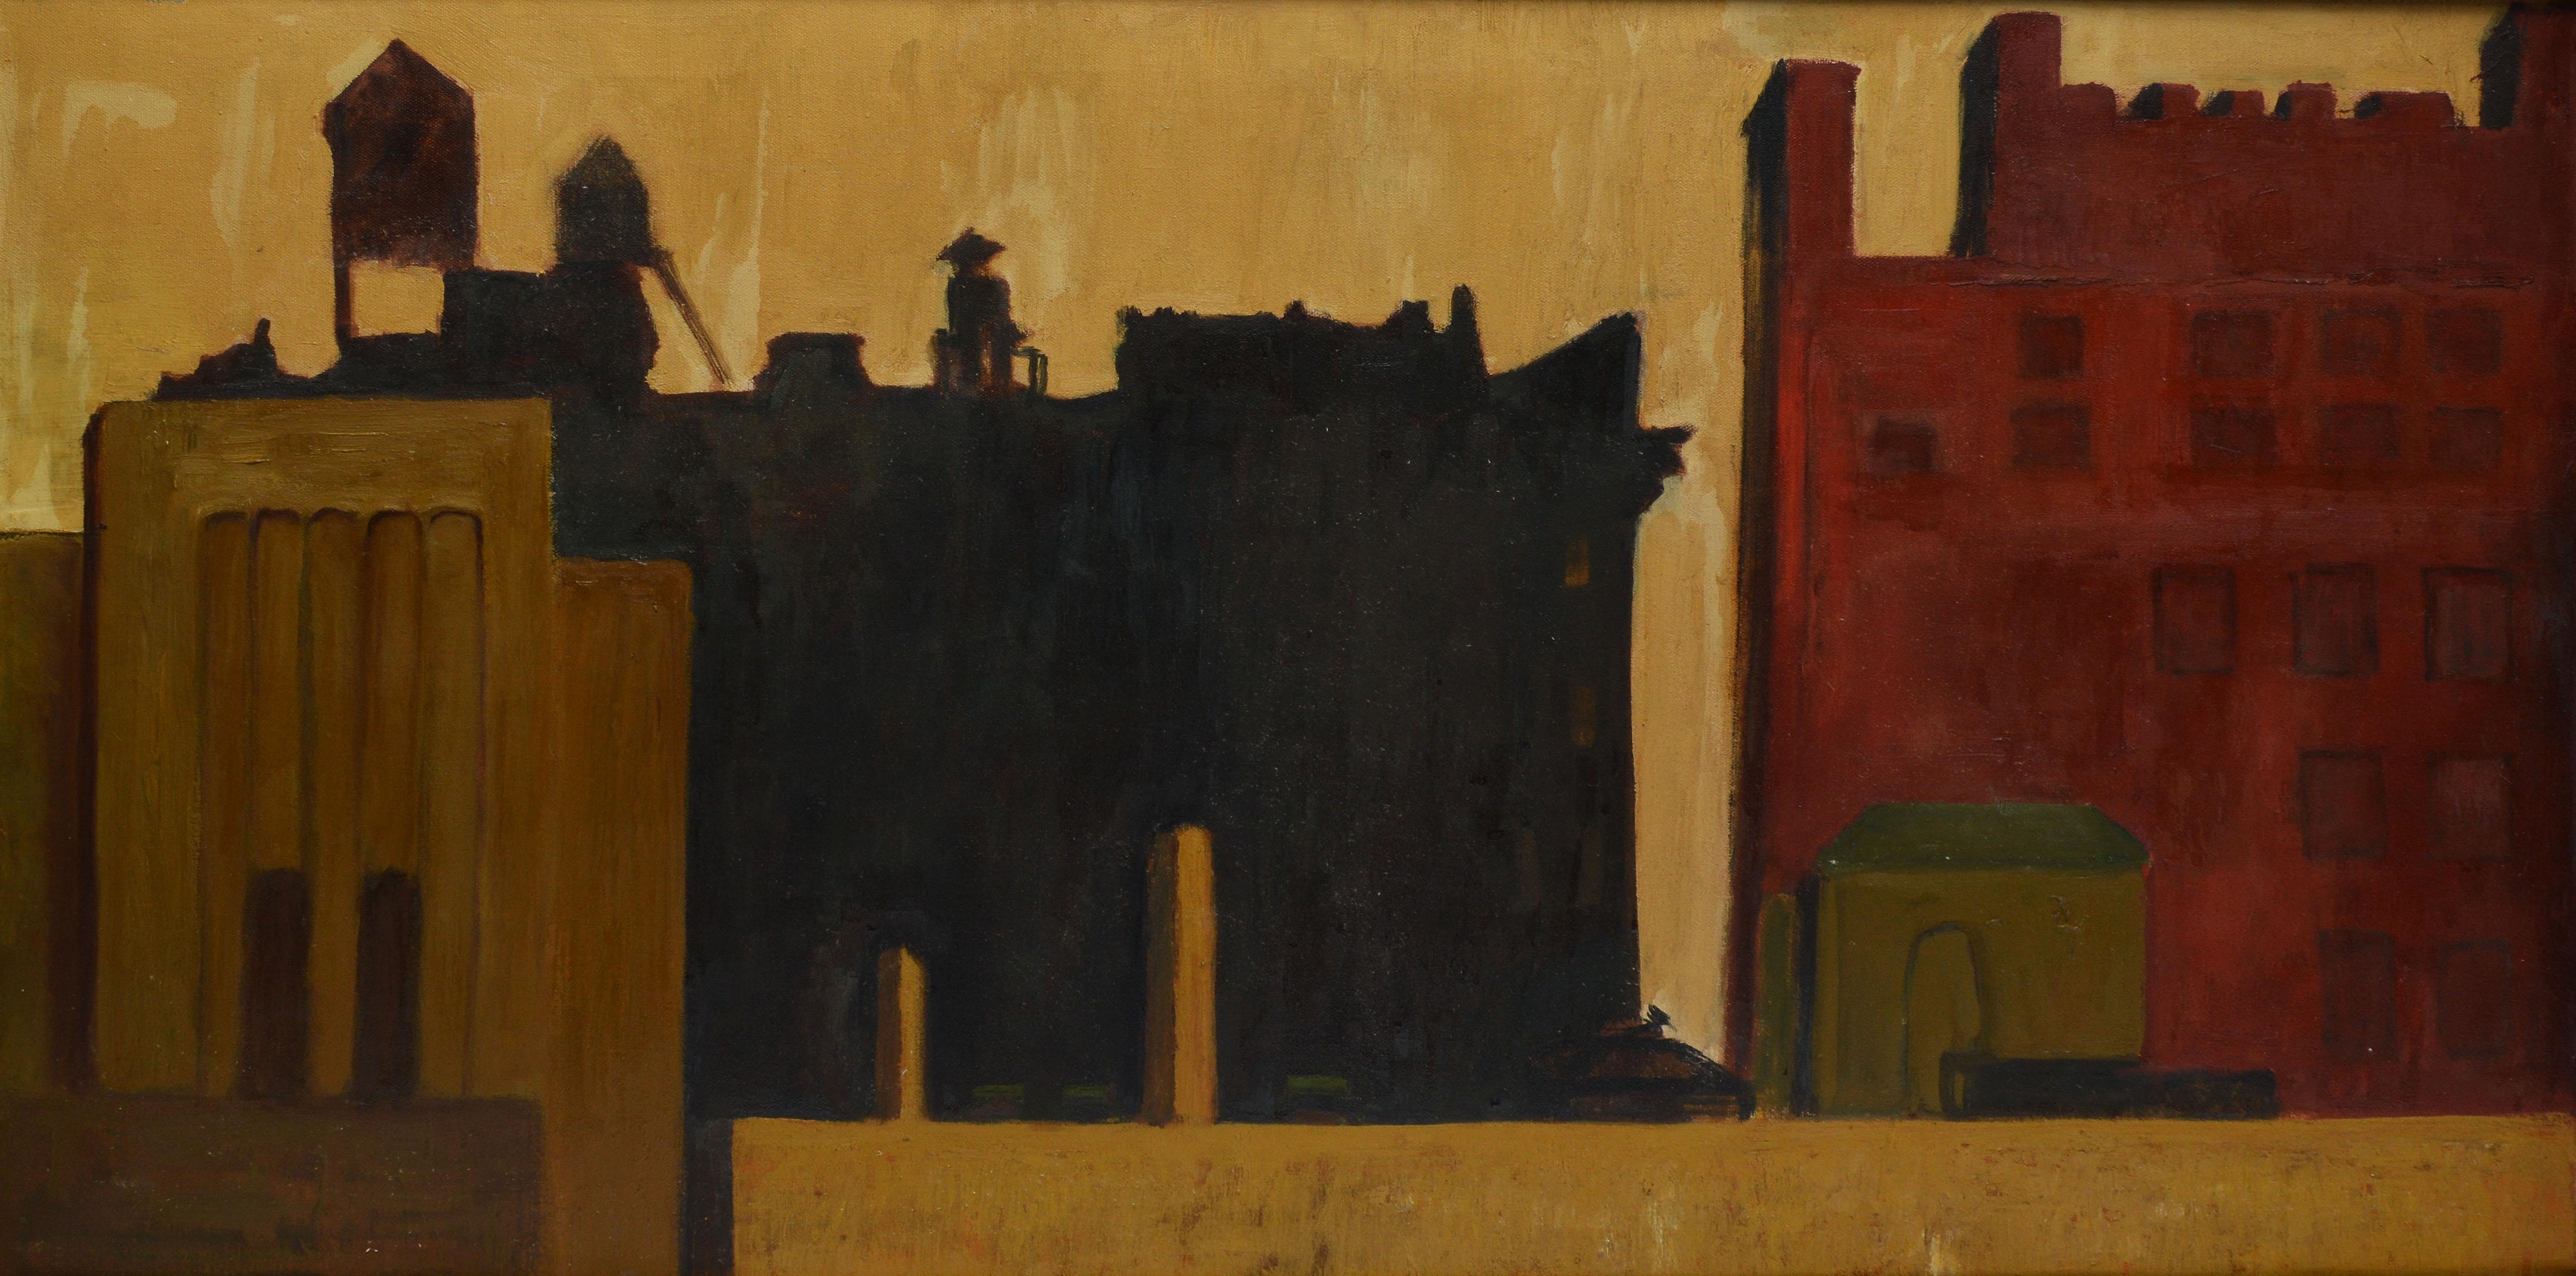 Vintage modernist cityscape oil painting.  Oil on canvas, circa 1940.  Unsigned.  Displayed in a period modernist frame.  Image, 36